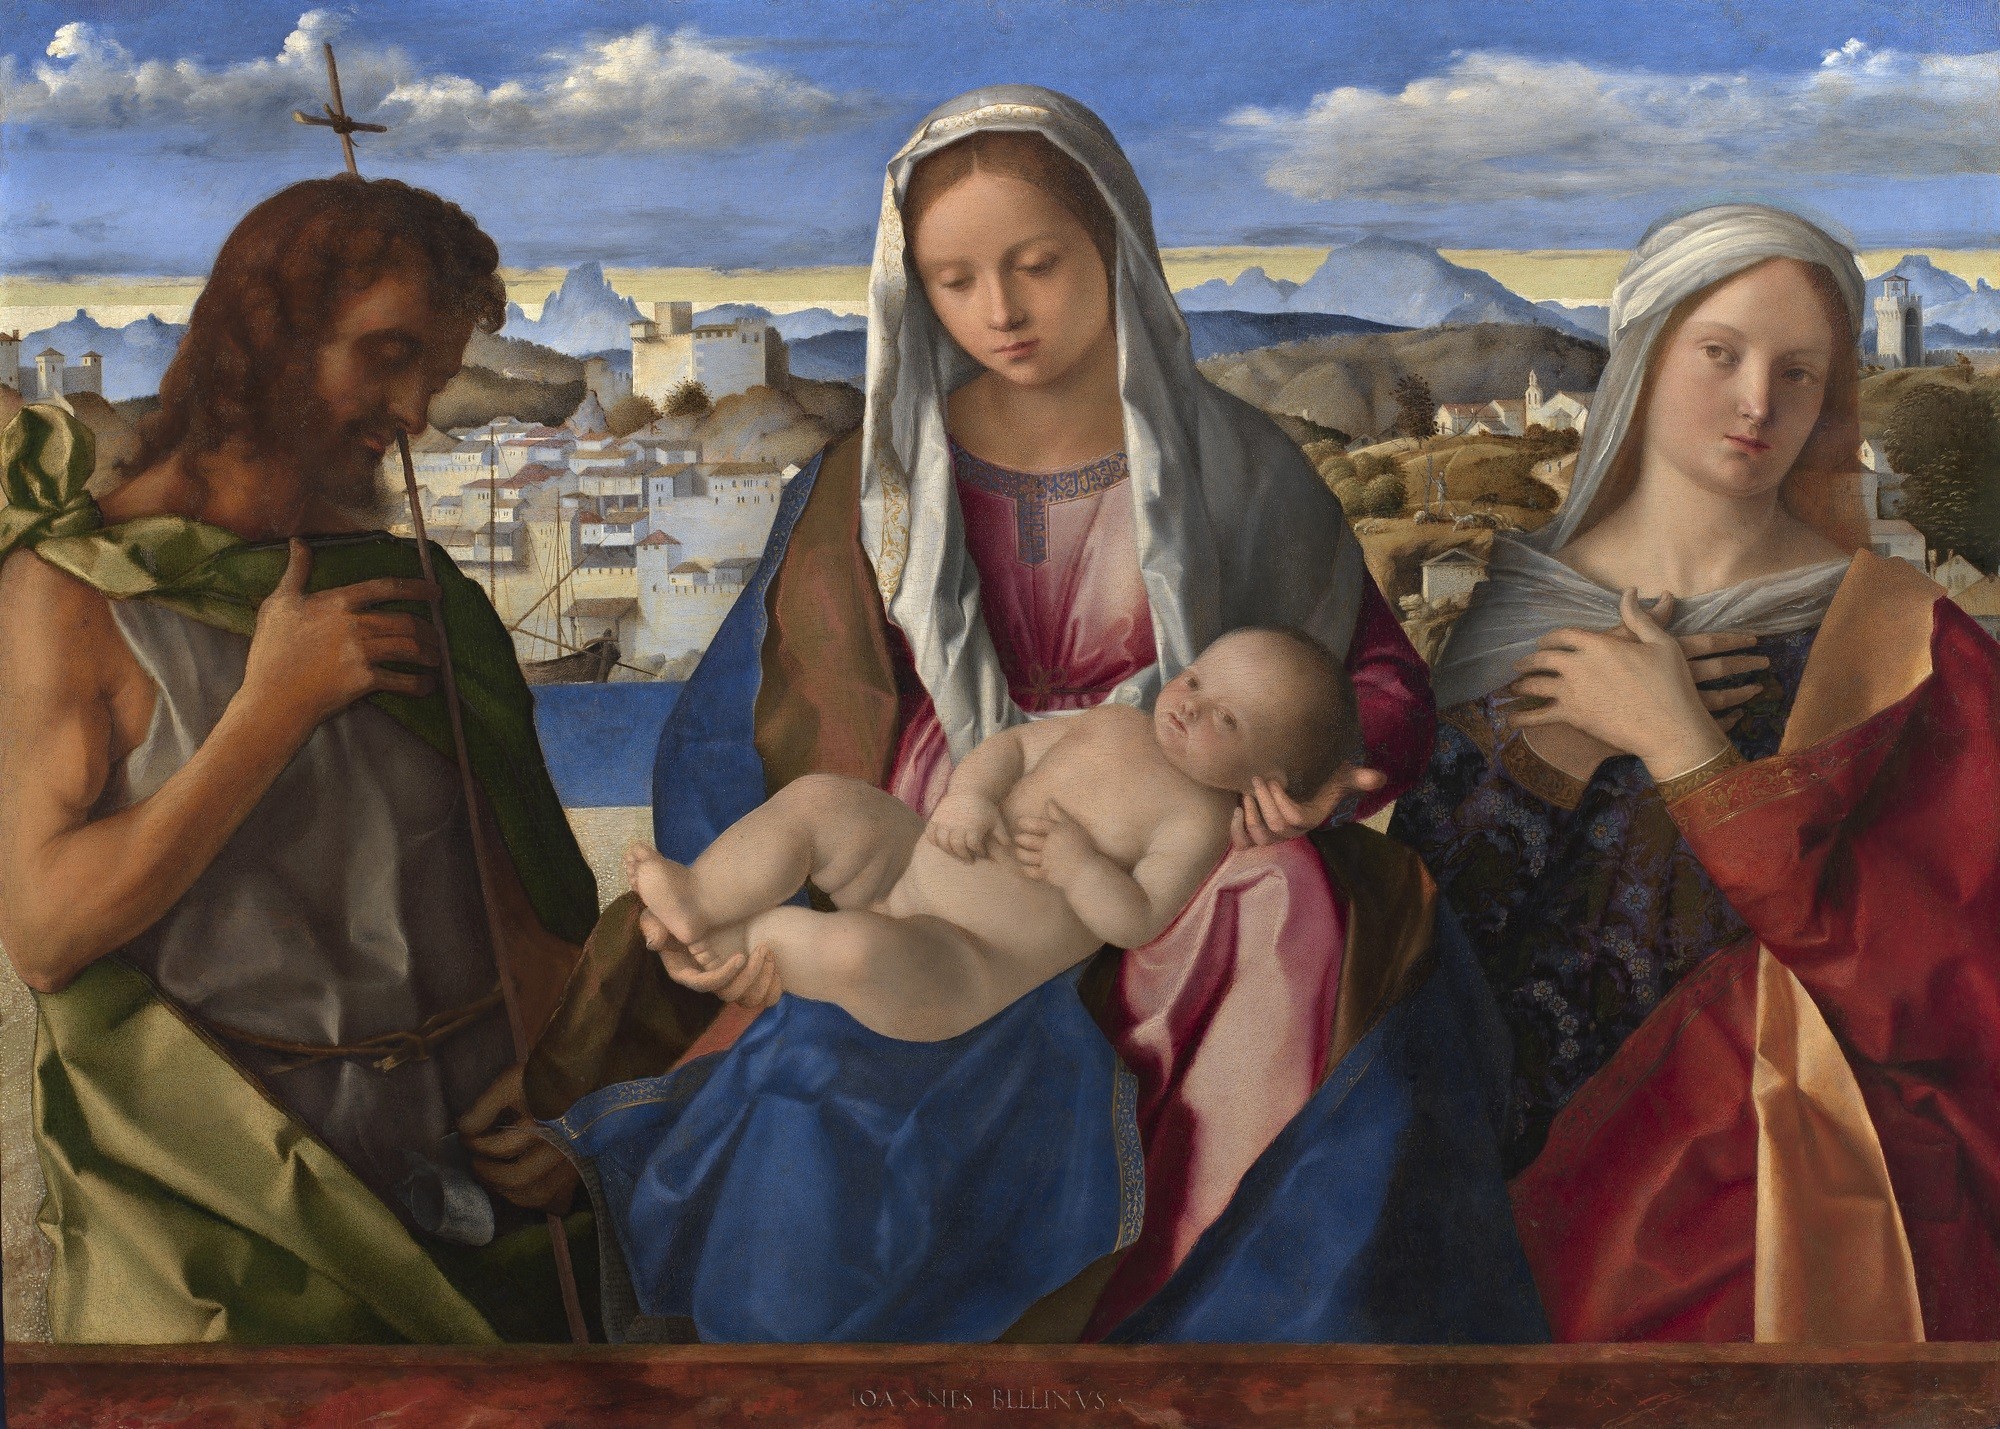 Giovanni Bellini, "Virgin and Child With Saint John the Baptist and a Female Saint in a Landscape," circa 1501.